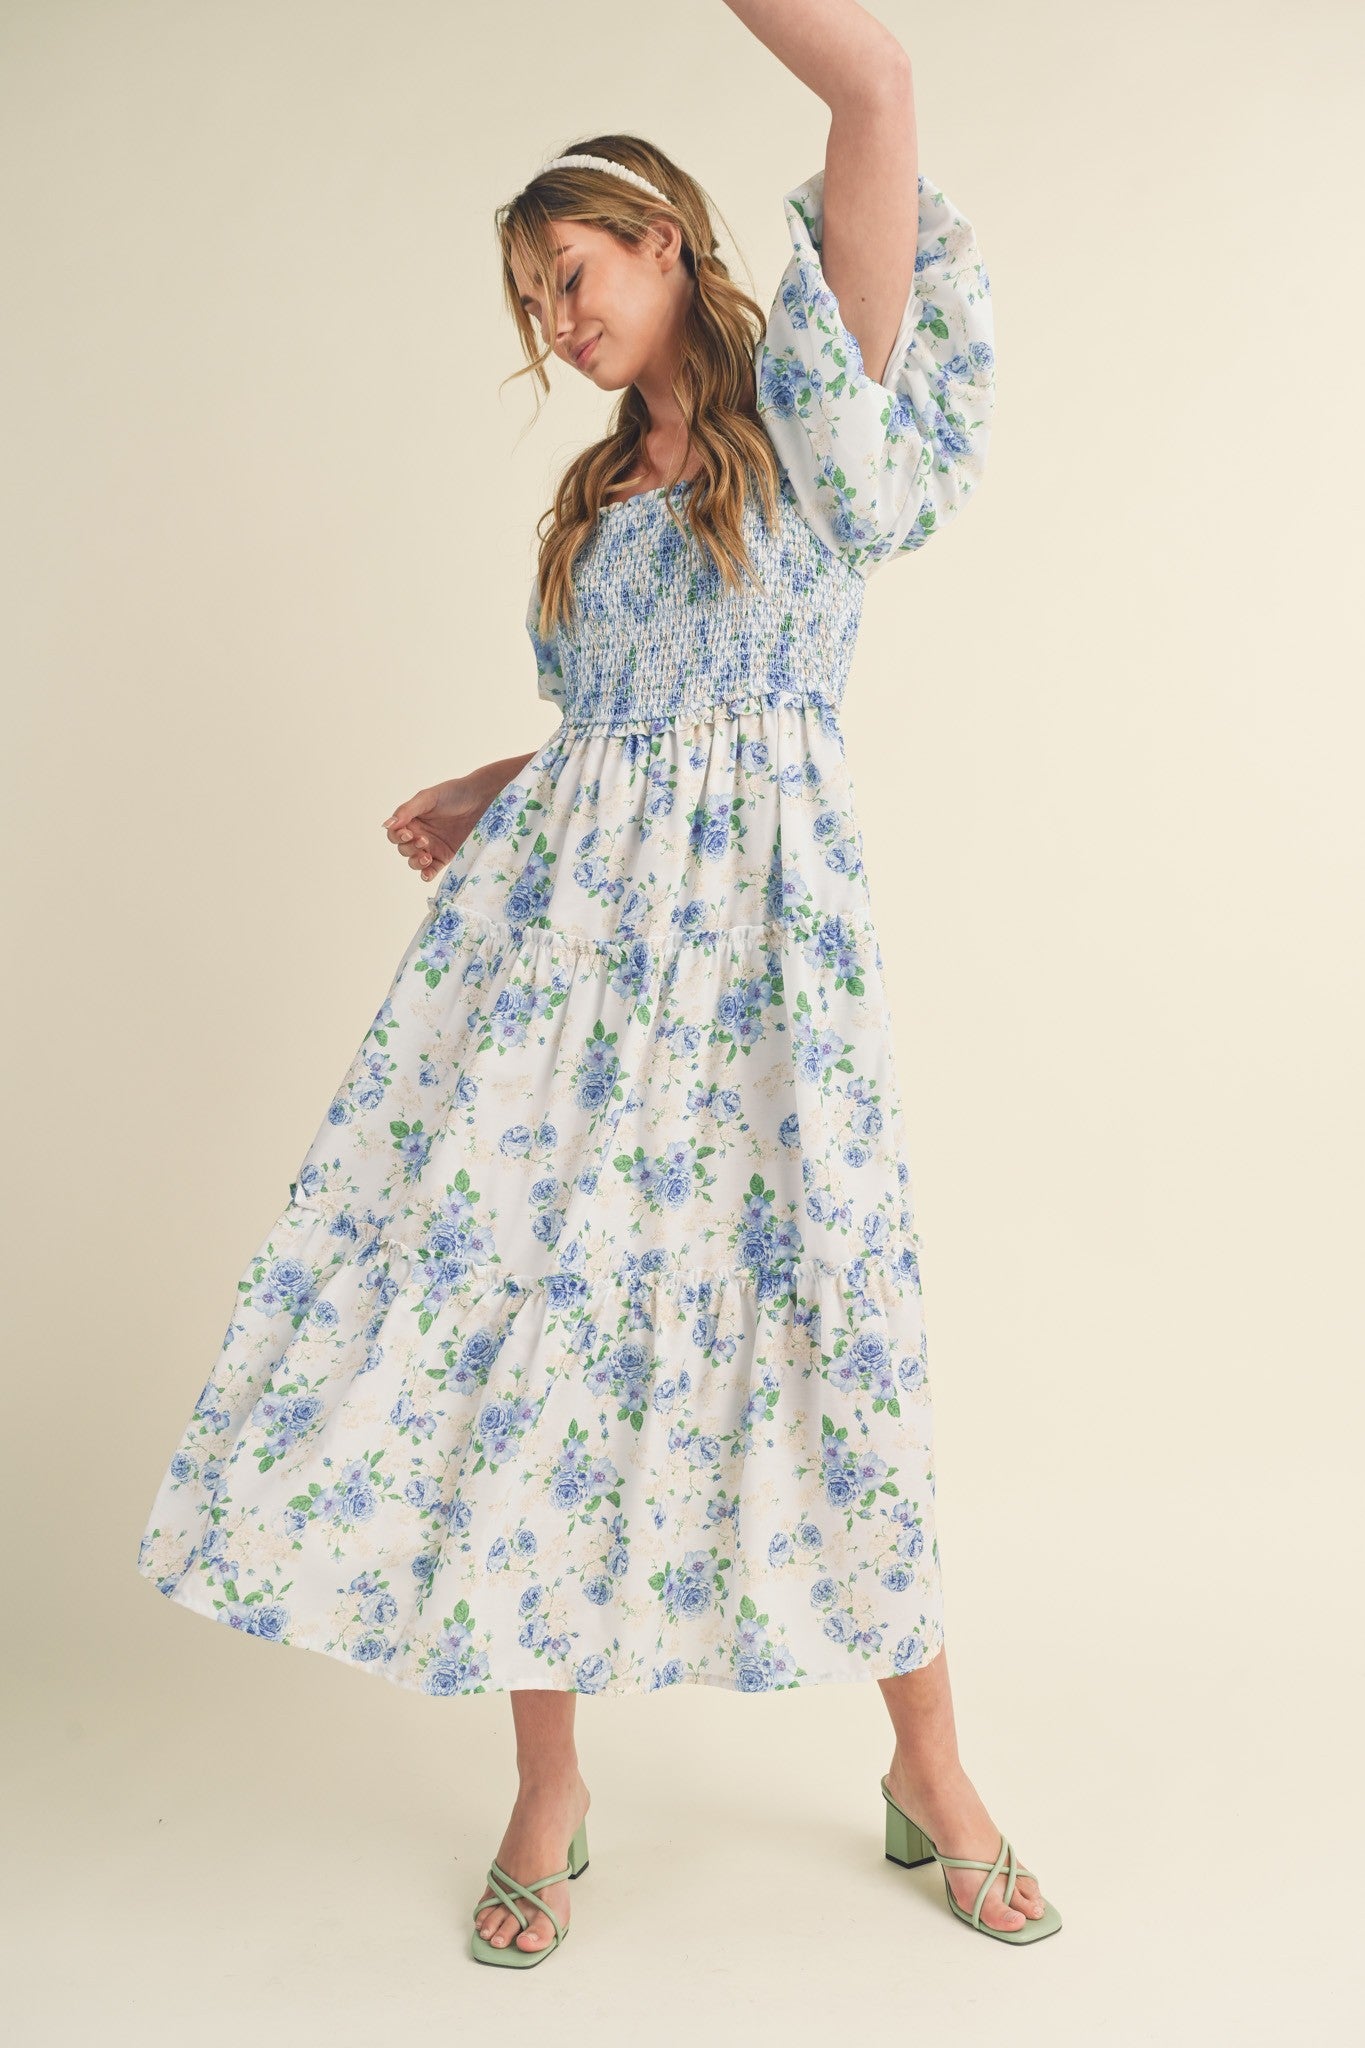 The Emery Floral Dress